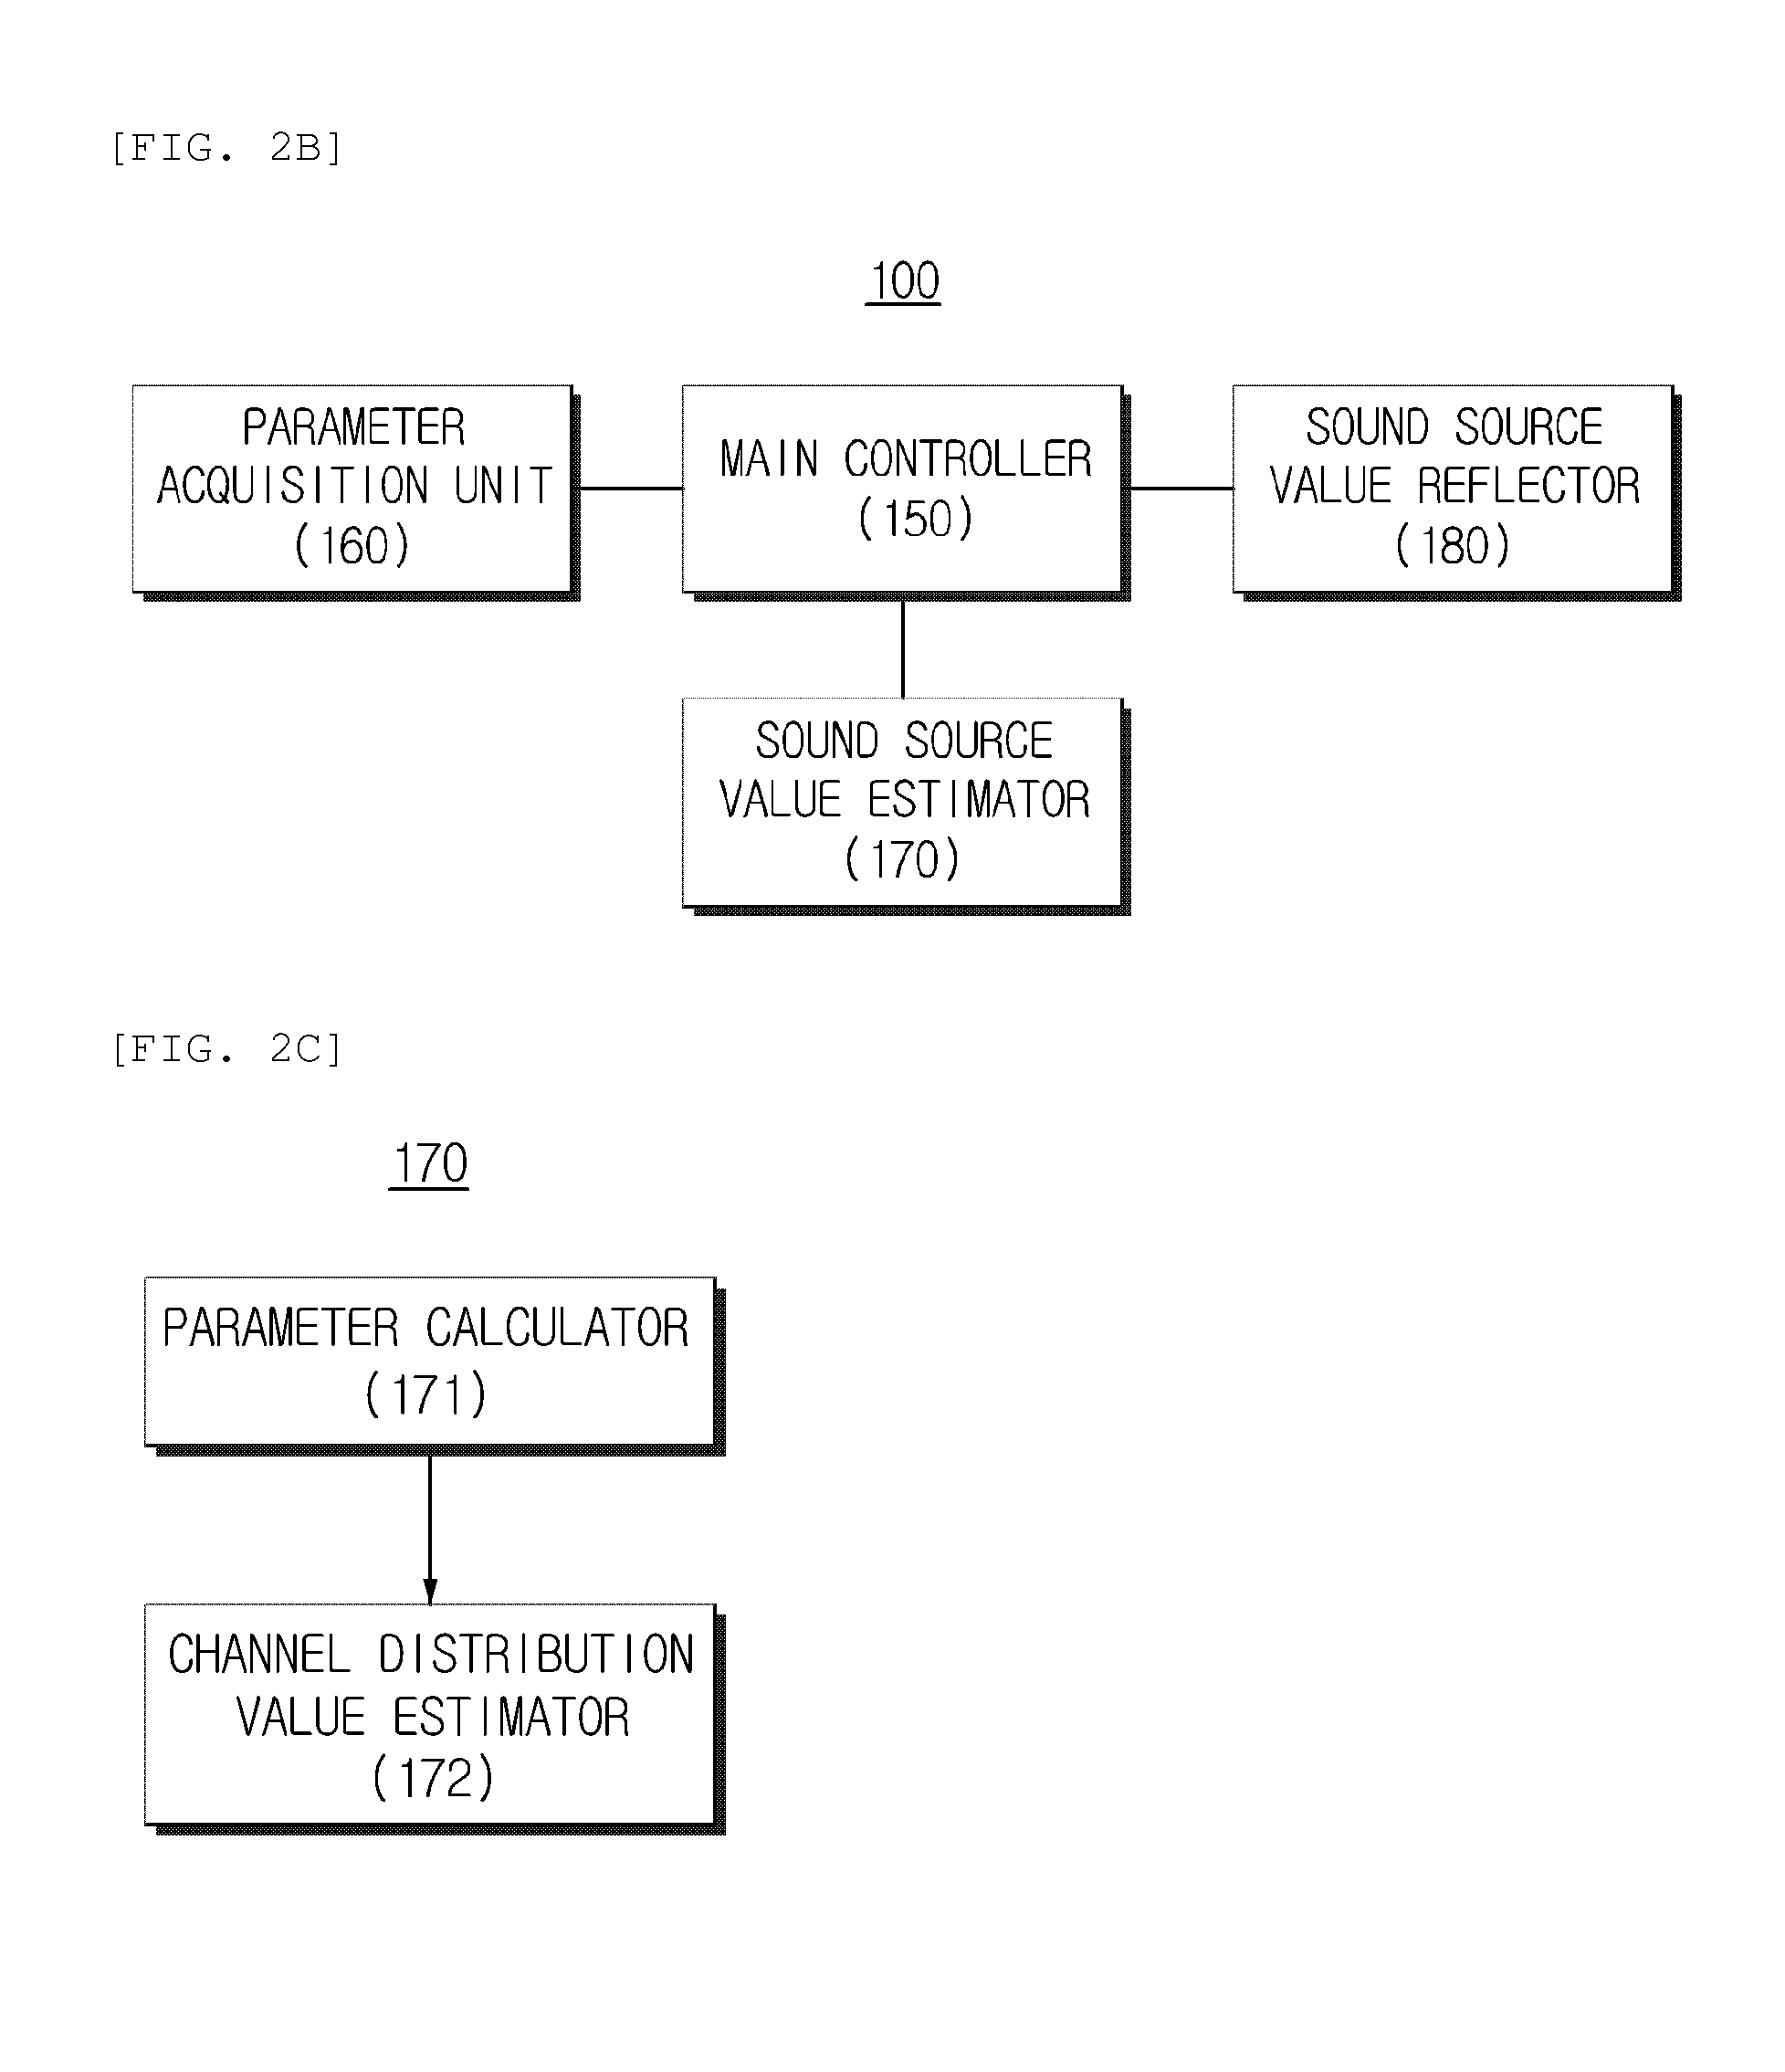 Apparatus and method for separating sound source